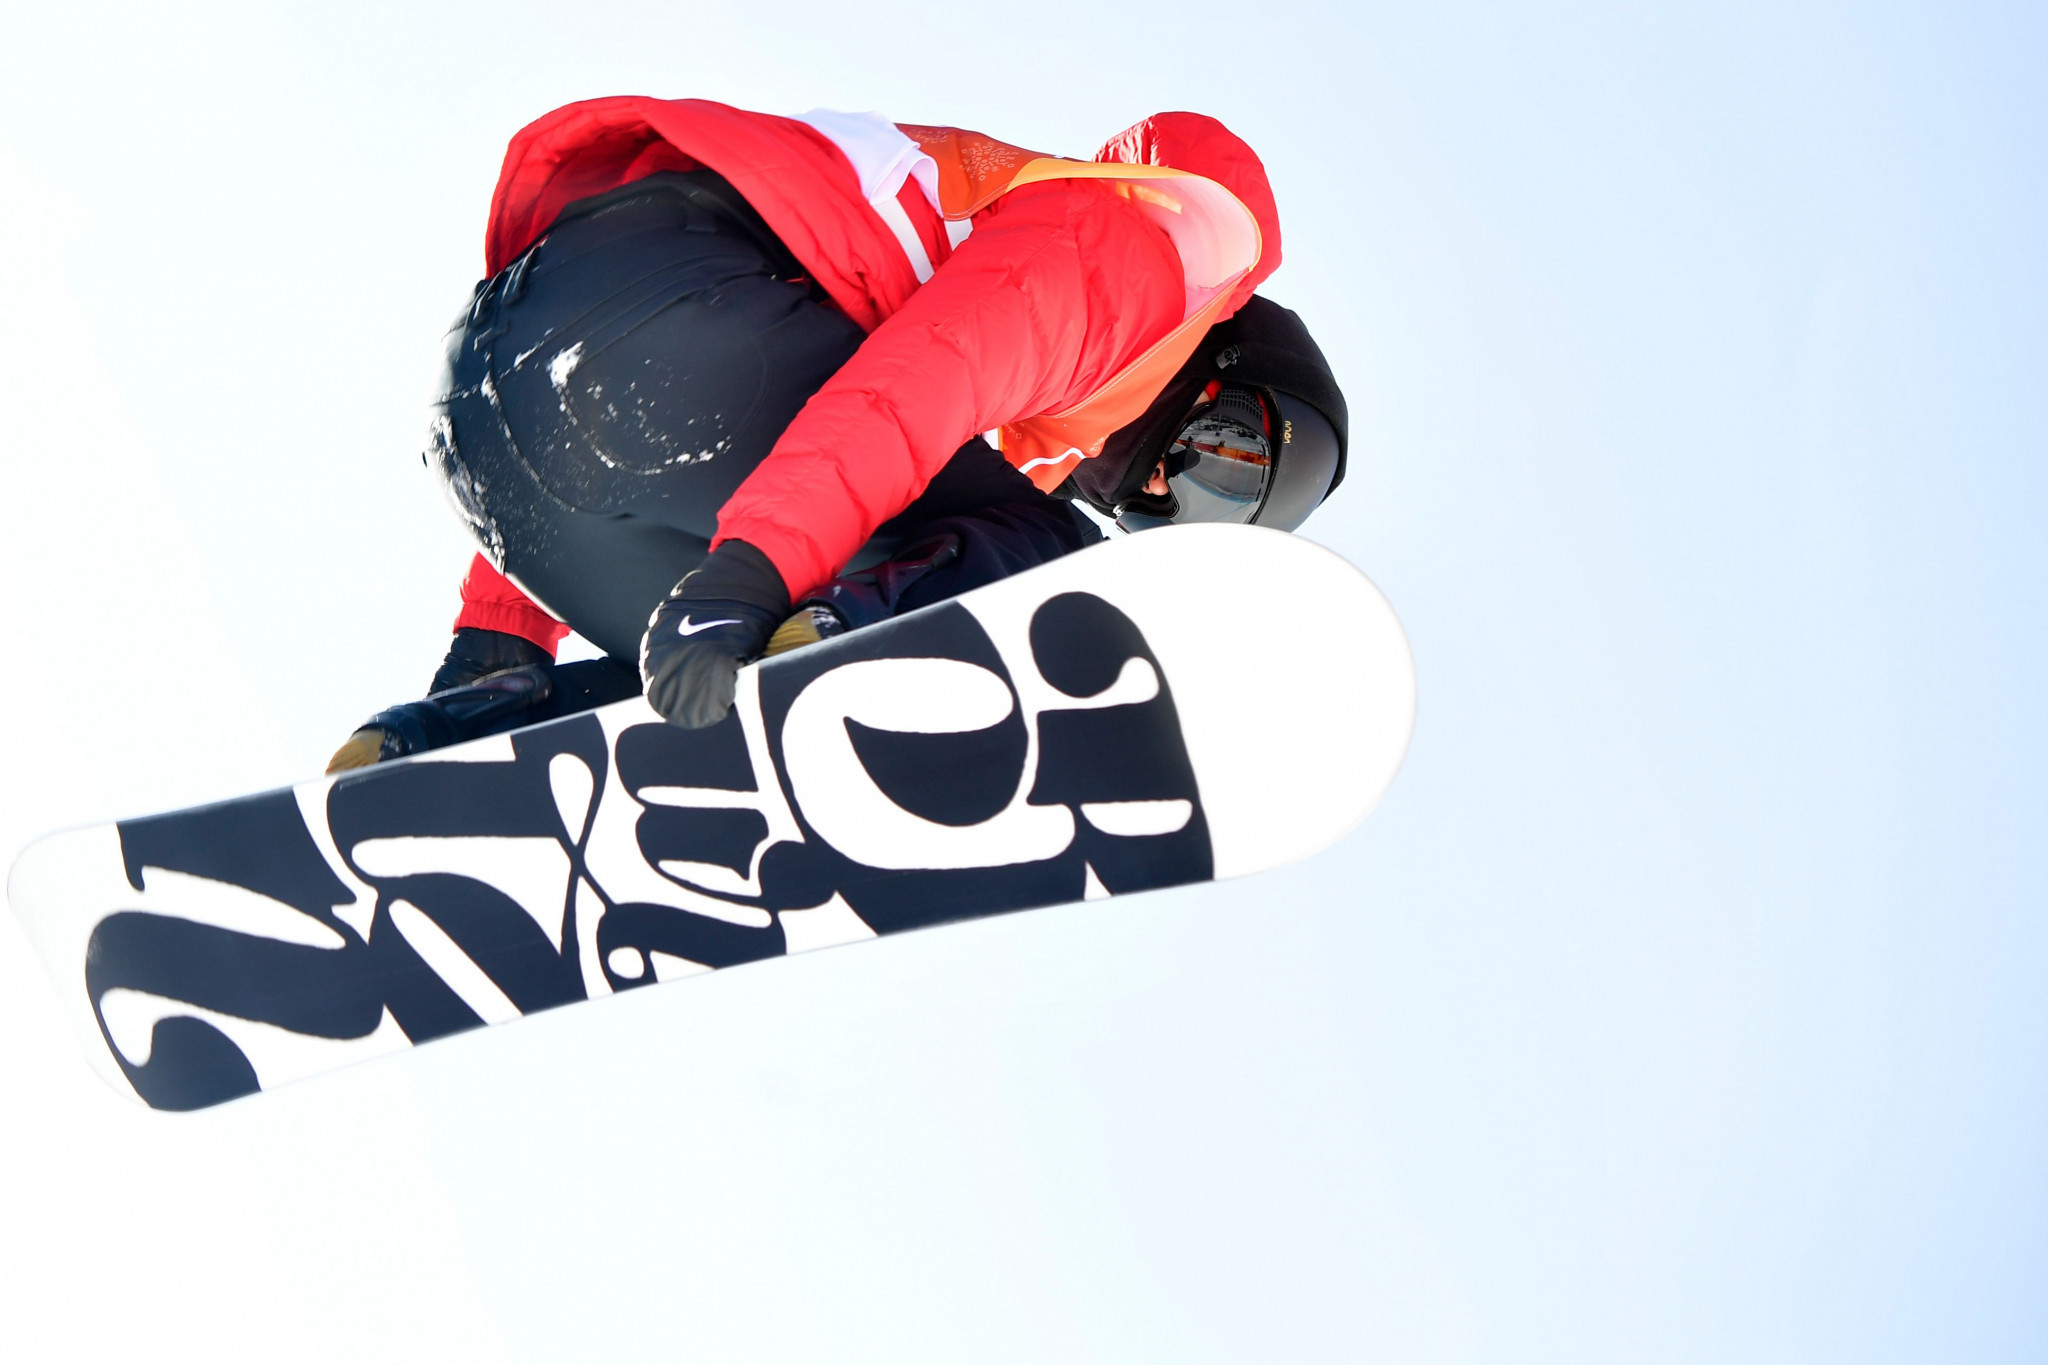 Cai Xuetong has won Halfpipe World Cup gold on home snow at Secret Garden in Hebei province ©Getty Images